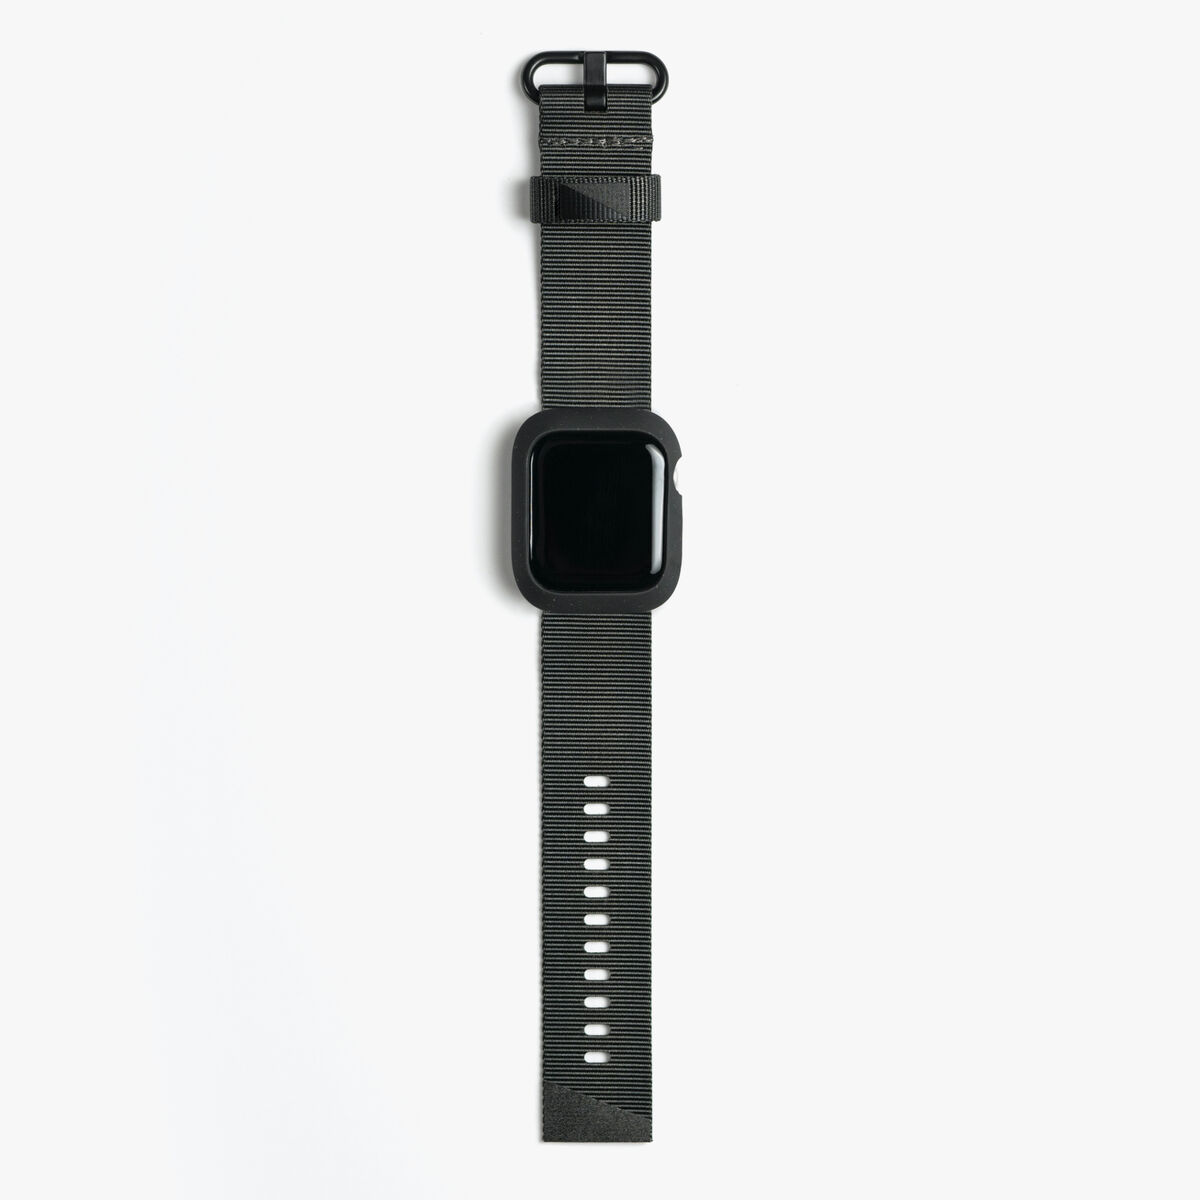 Moab Case + Band (Black) for Apple Watch Series 6 / Watch SE / Watch Series 5 / Watch Series 4 - 40mm,, large